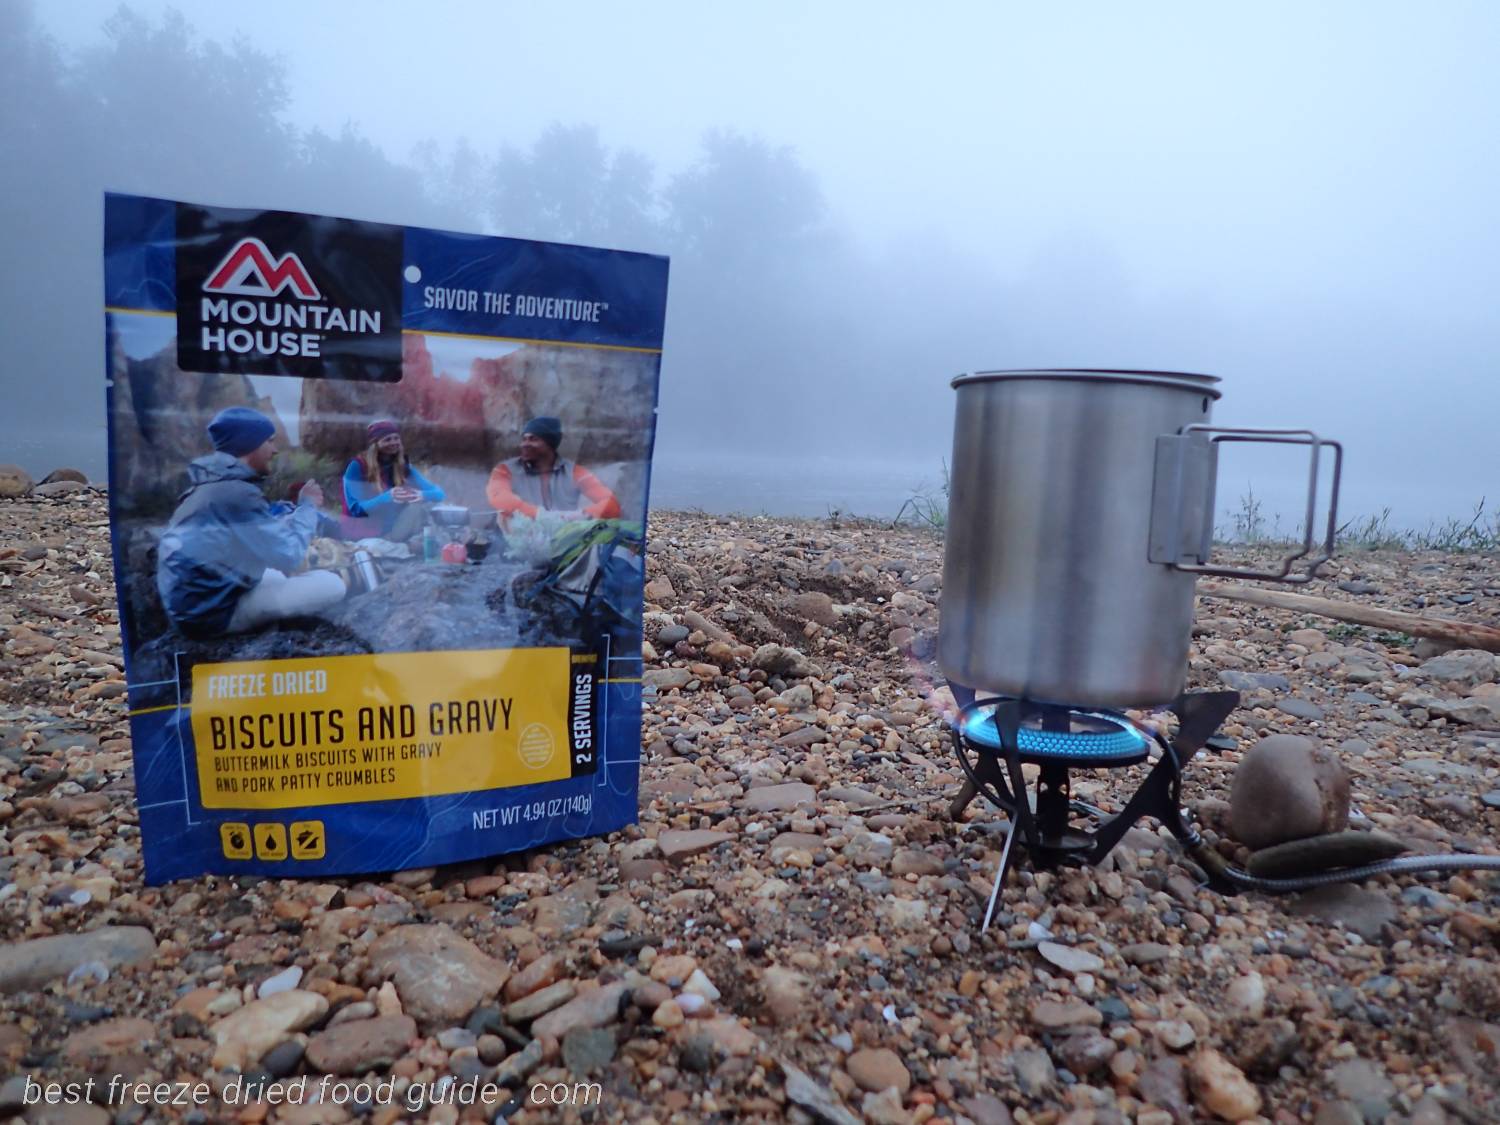 Mountain House Biscuits and Gravy for a camping breakfast along the river | Best Freeze-Dried Food | freeze-dried emergency Food | Freeze-Dried Camping Food | freeze-dried camping meals | freeze-dried backpacking food | freeze-dried hiking meals | freeze-dried hiking food | Mountain House freeze-dried food  